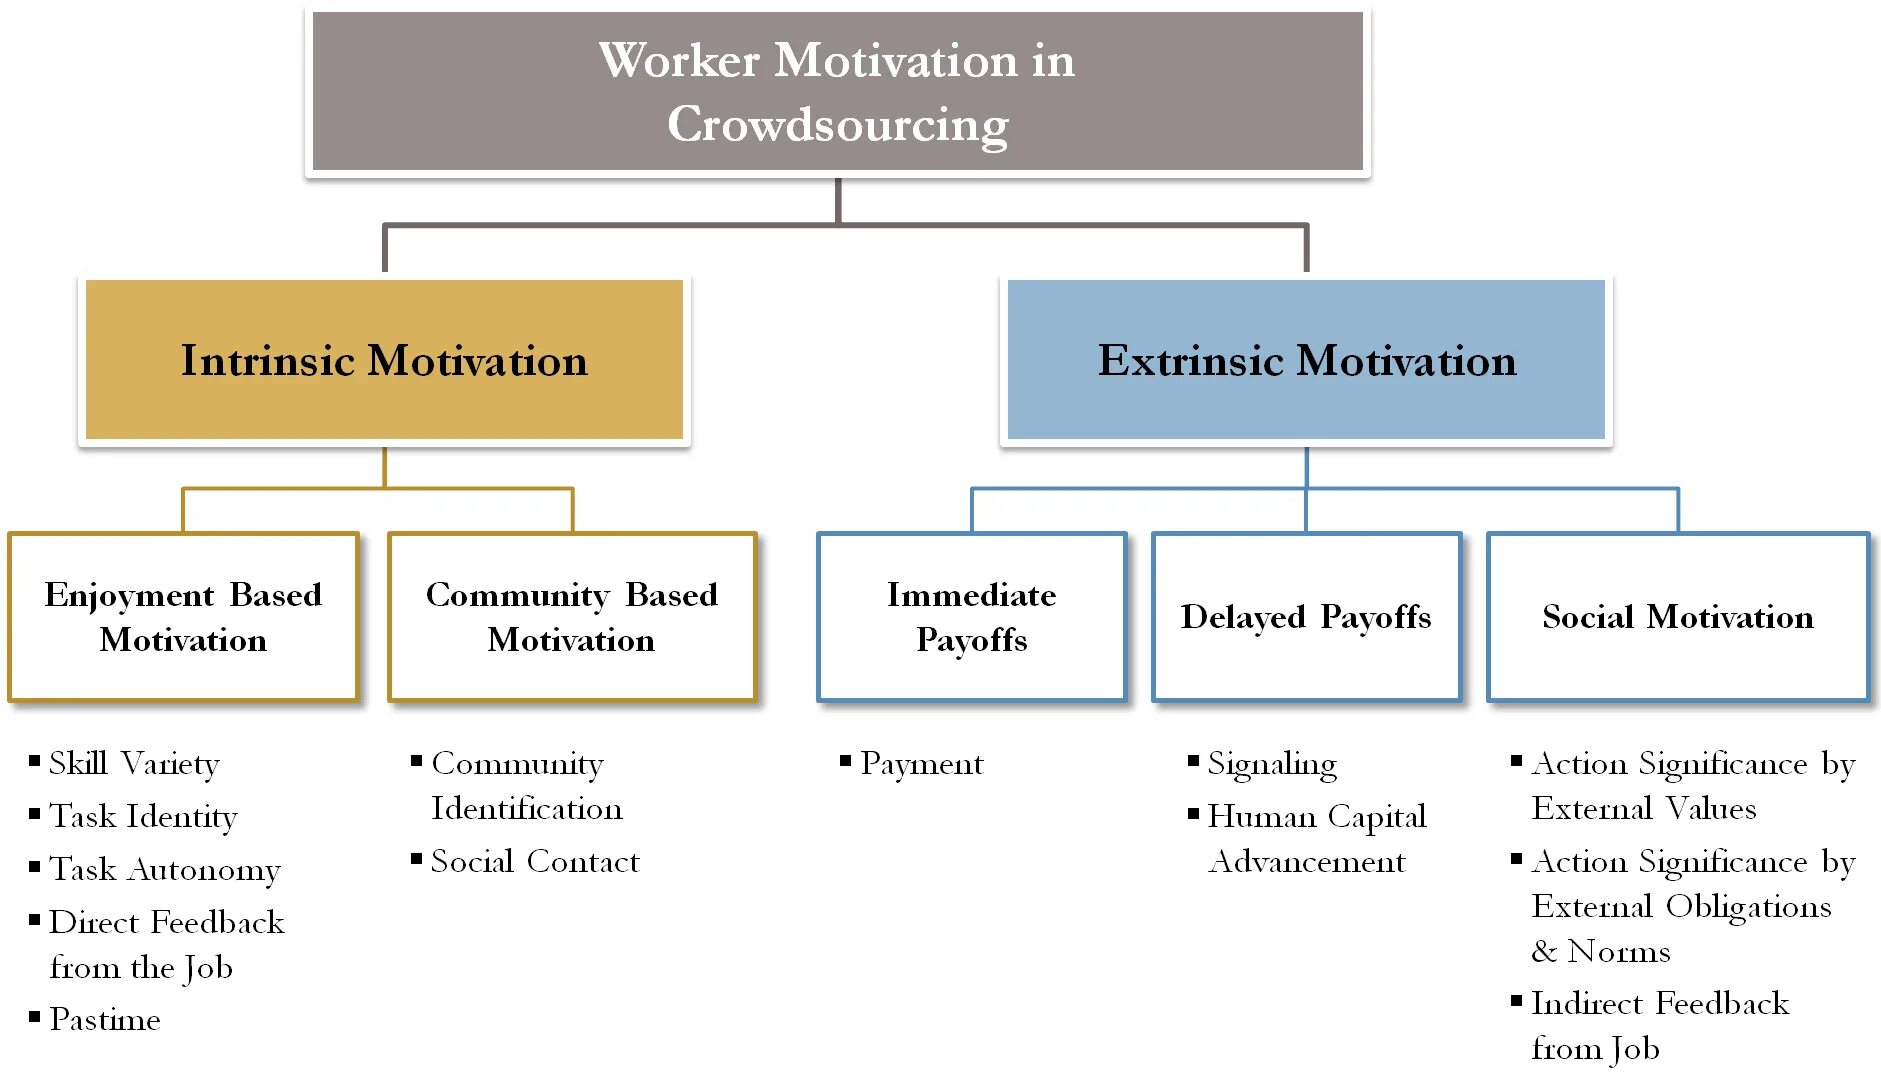 Motivated learning. Intrinsic Motivation. Extrinsic and intrinsic Motivation. Intrinsic vs. extrinsic Motivation. Types of Motivation.